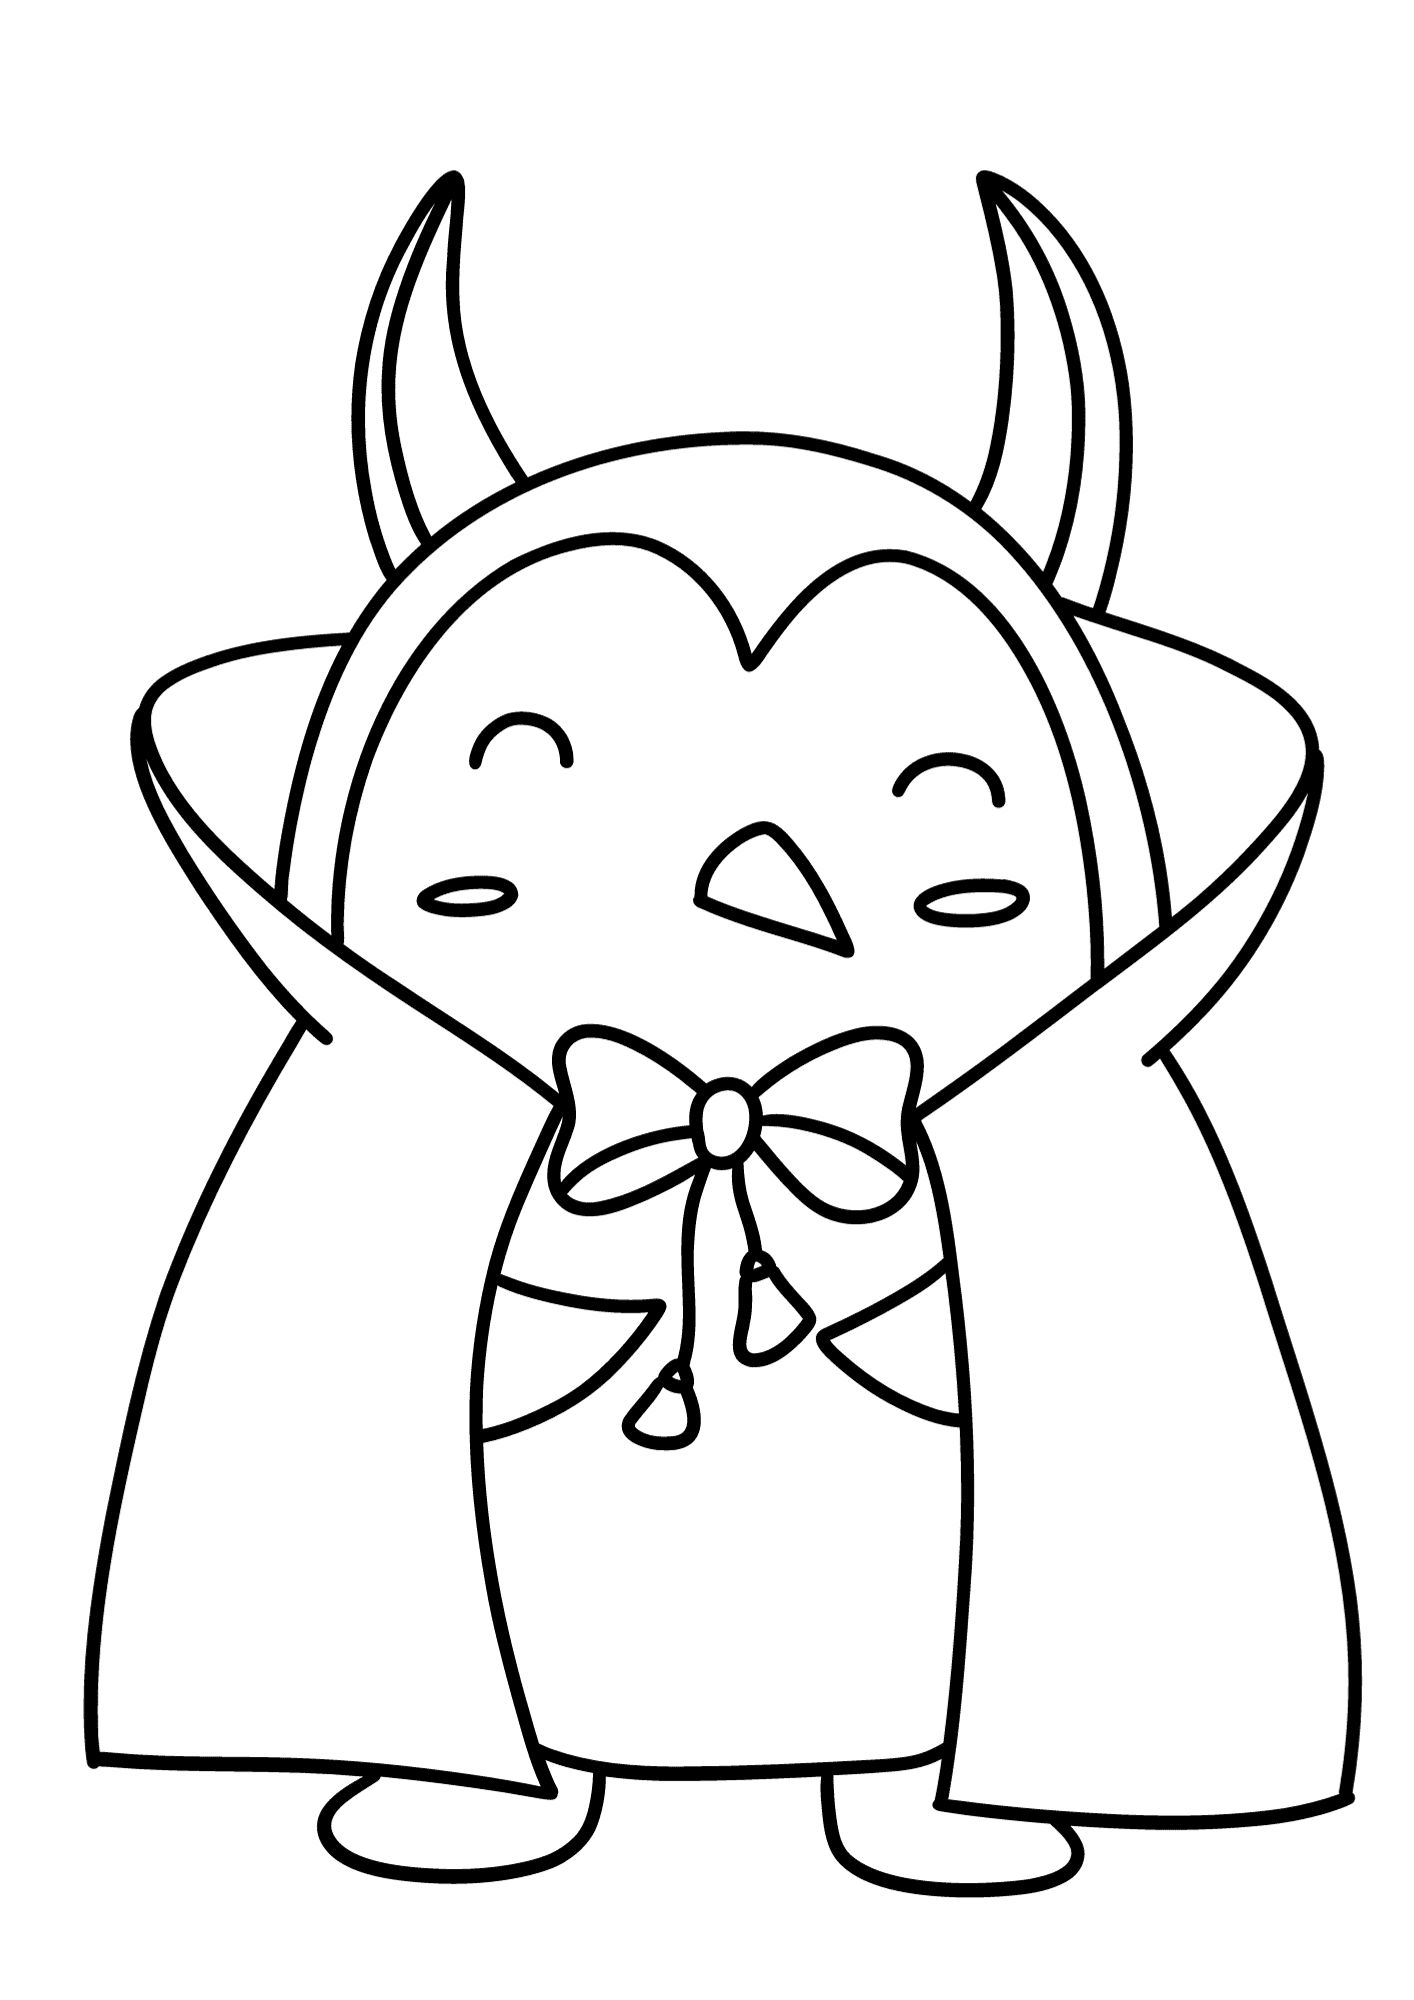 Halloween Penguin Hand Drawn Coloring Page